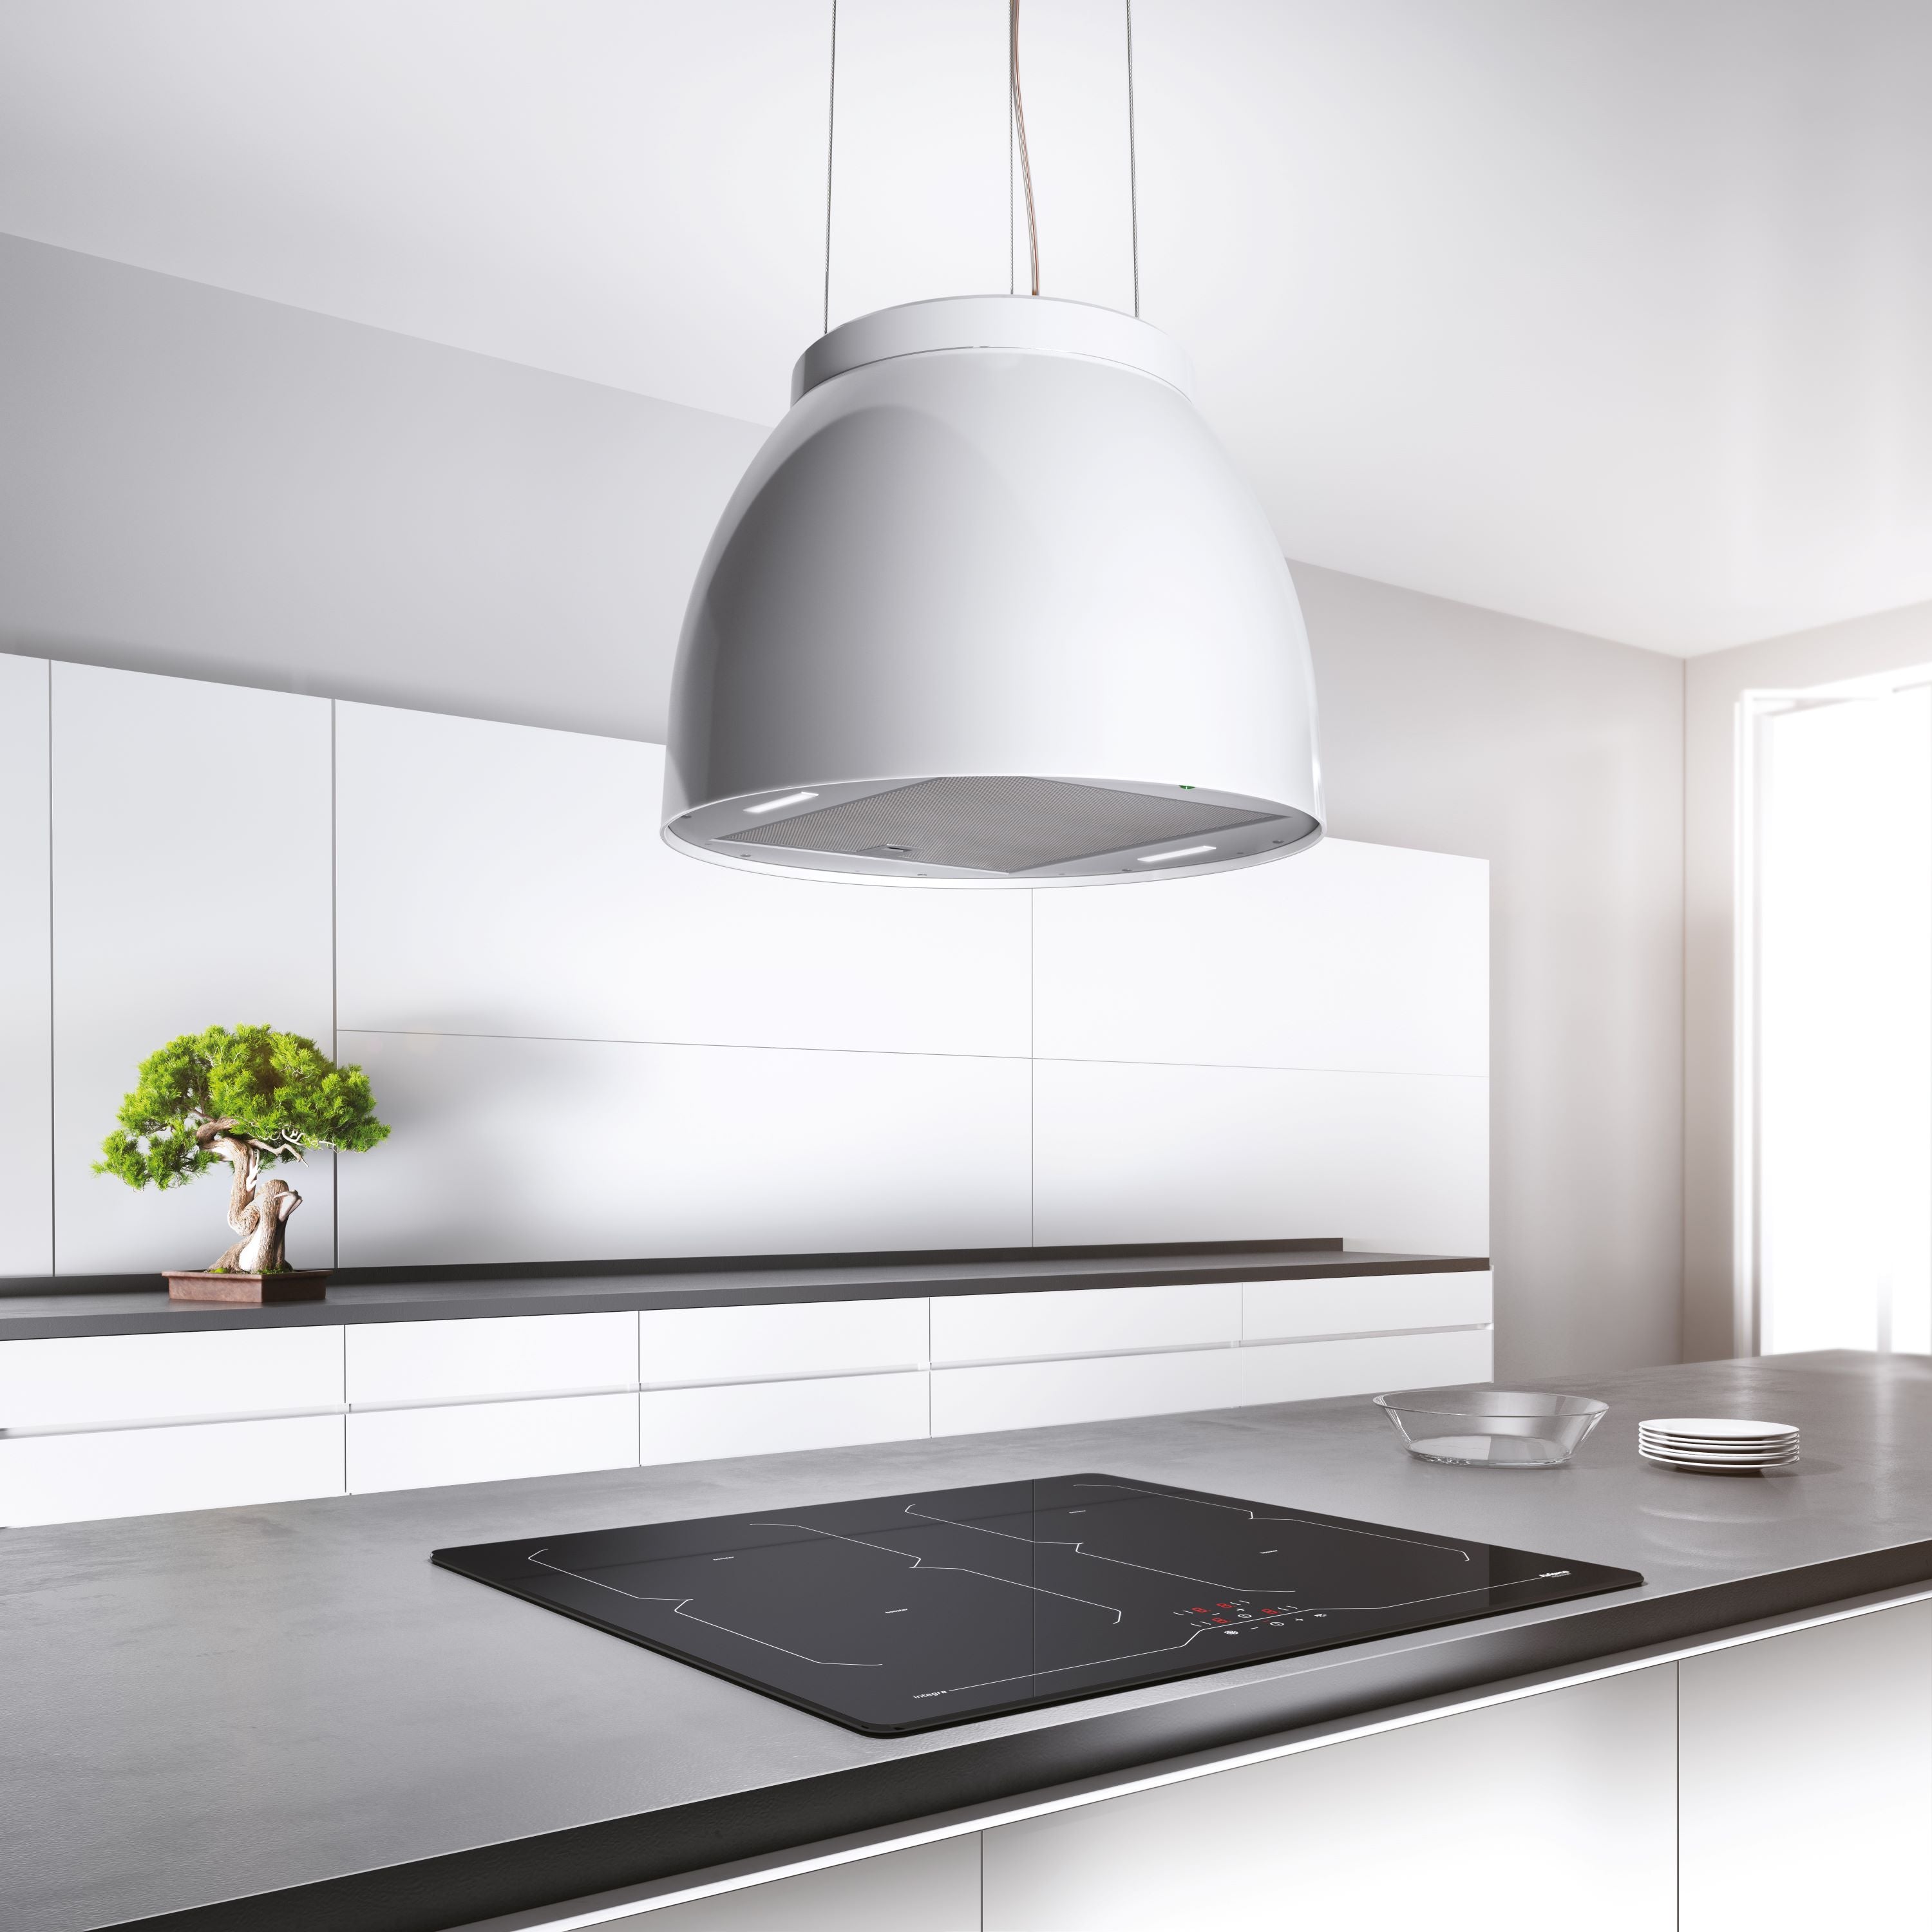 Airforce Luna Island Cooker Hood 45cm in White Finish with Slim LED Lights